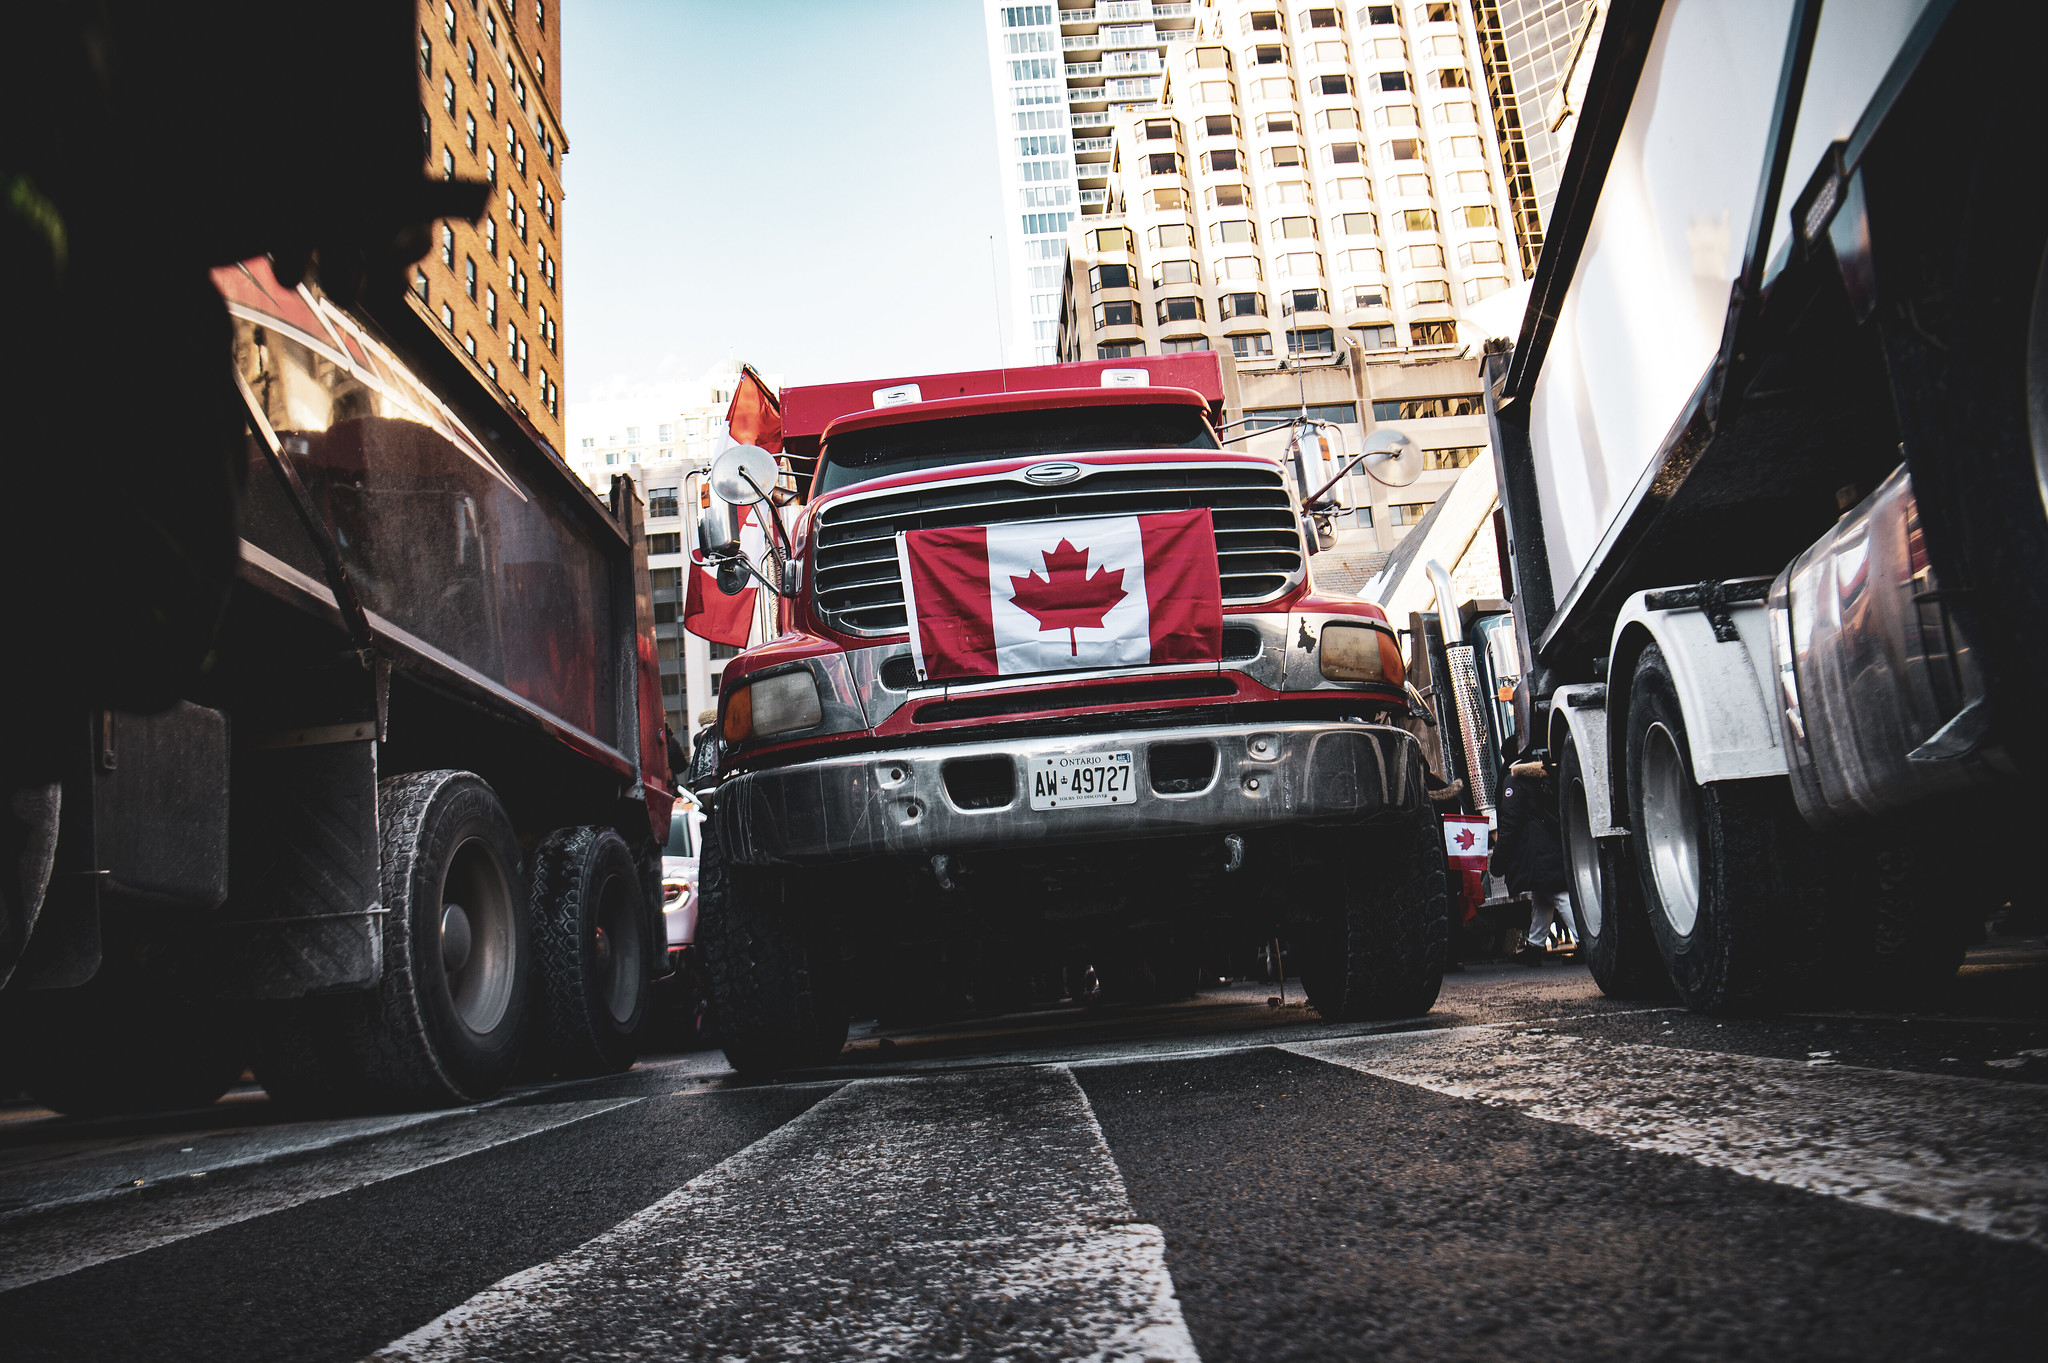 A truck with the Canadian flag over its grill blocks a street in Toronto